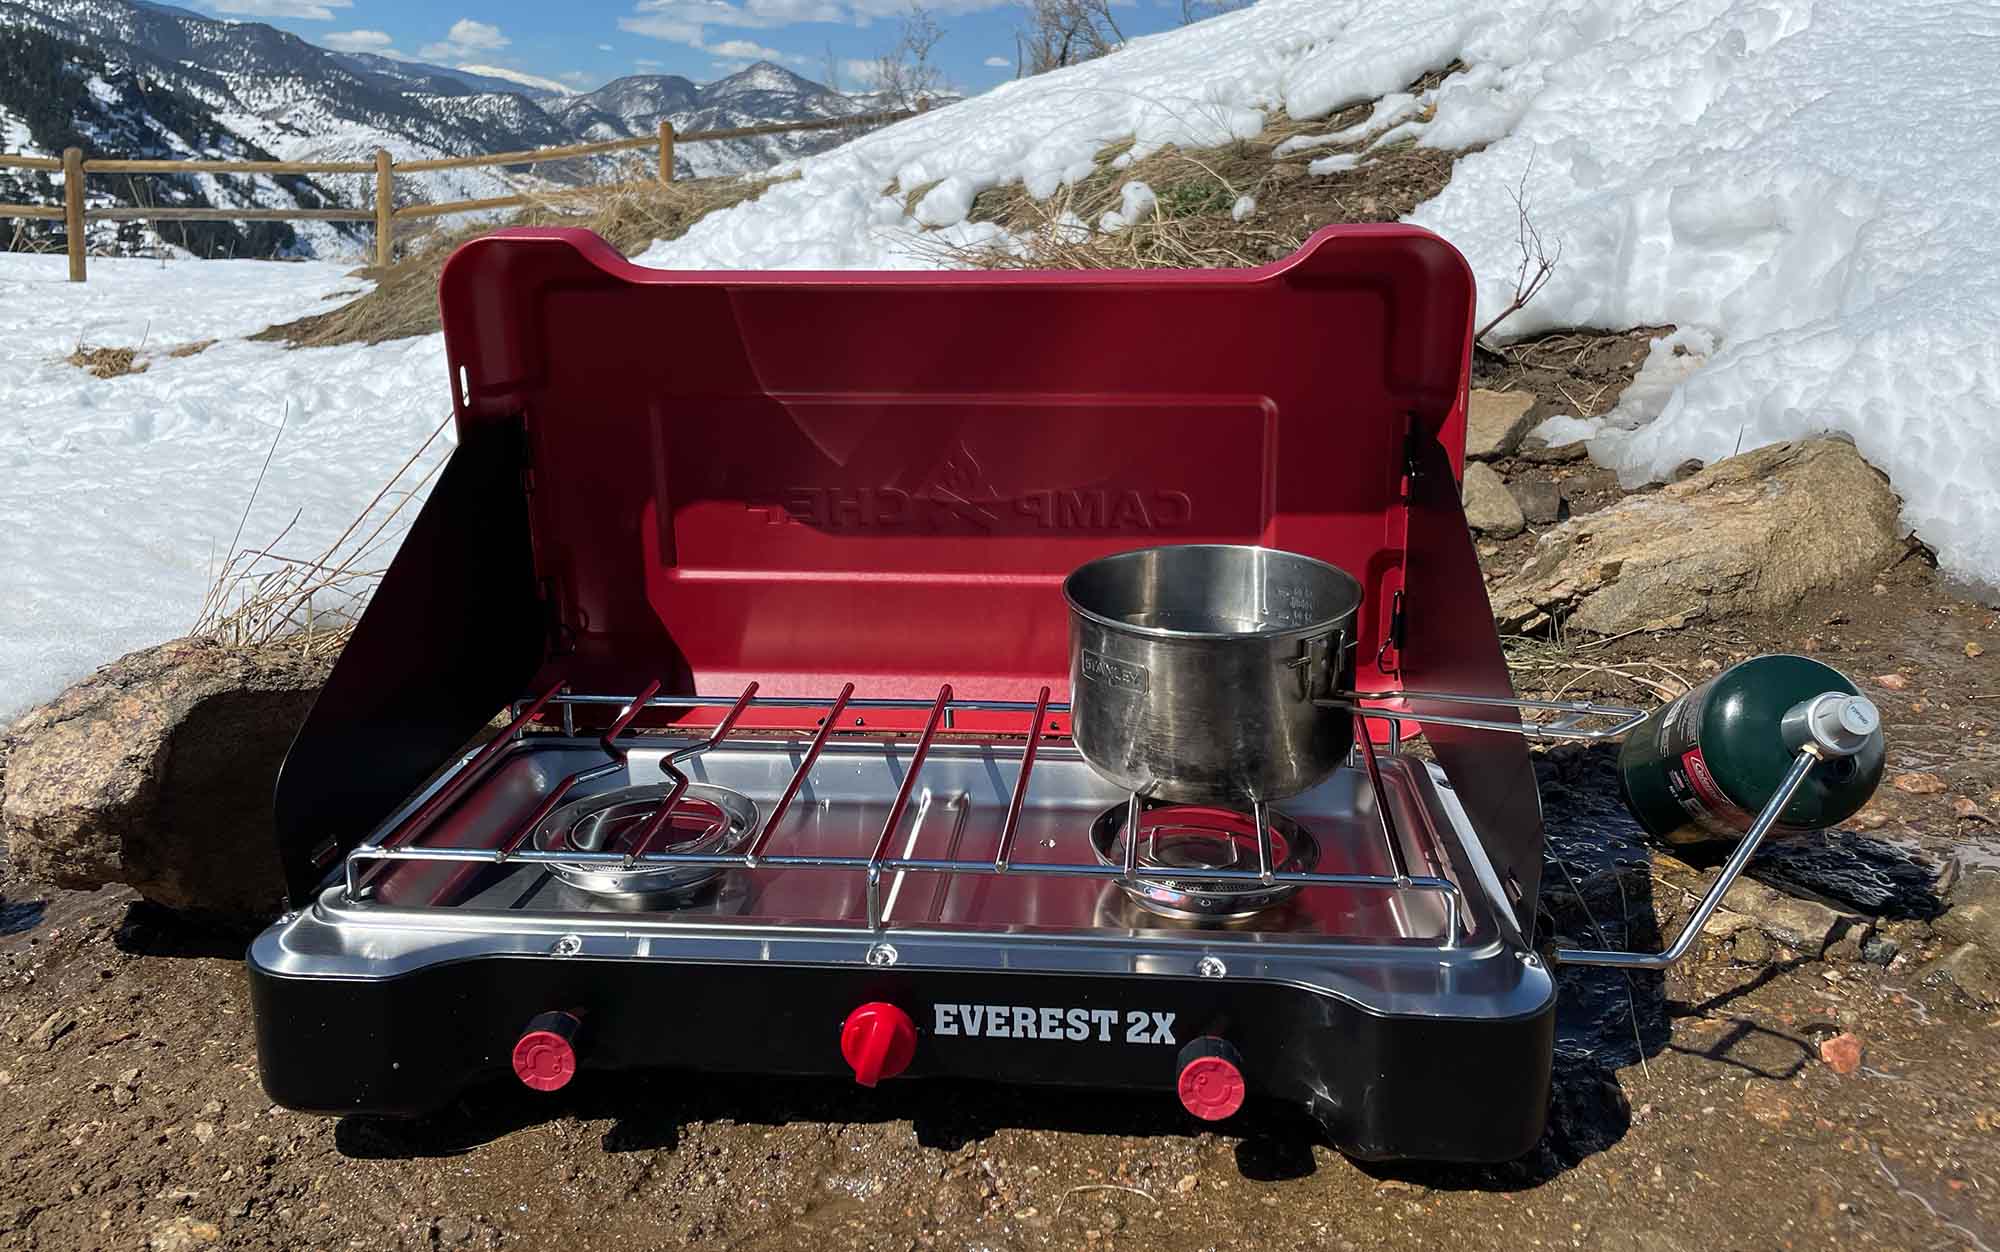 We tested the Camp Chef Everest 2X.